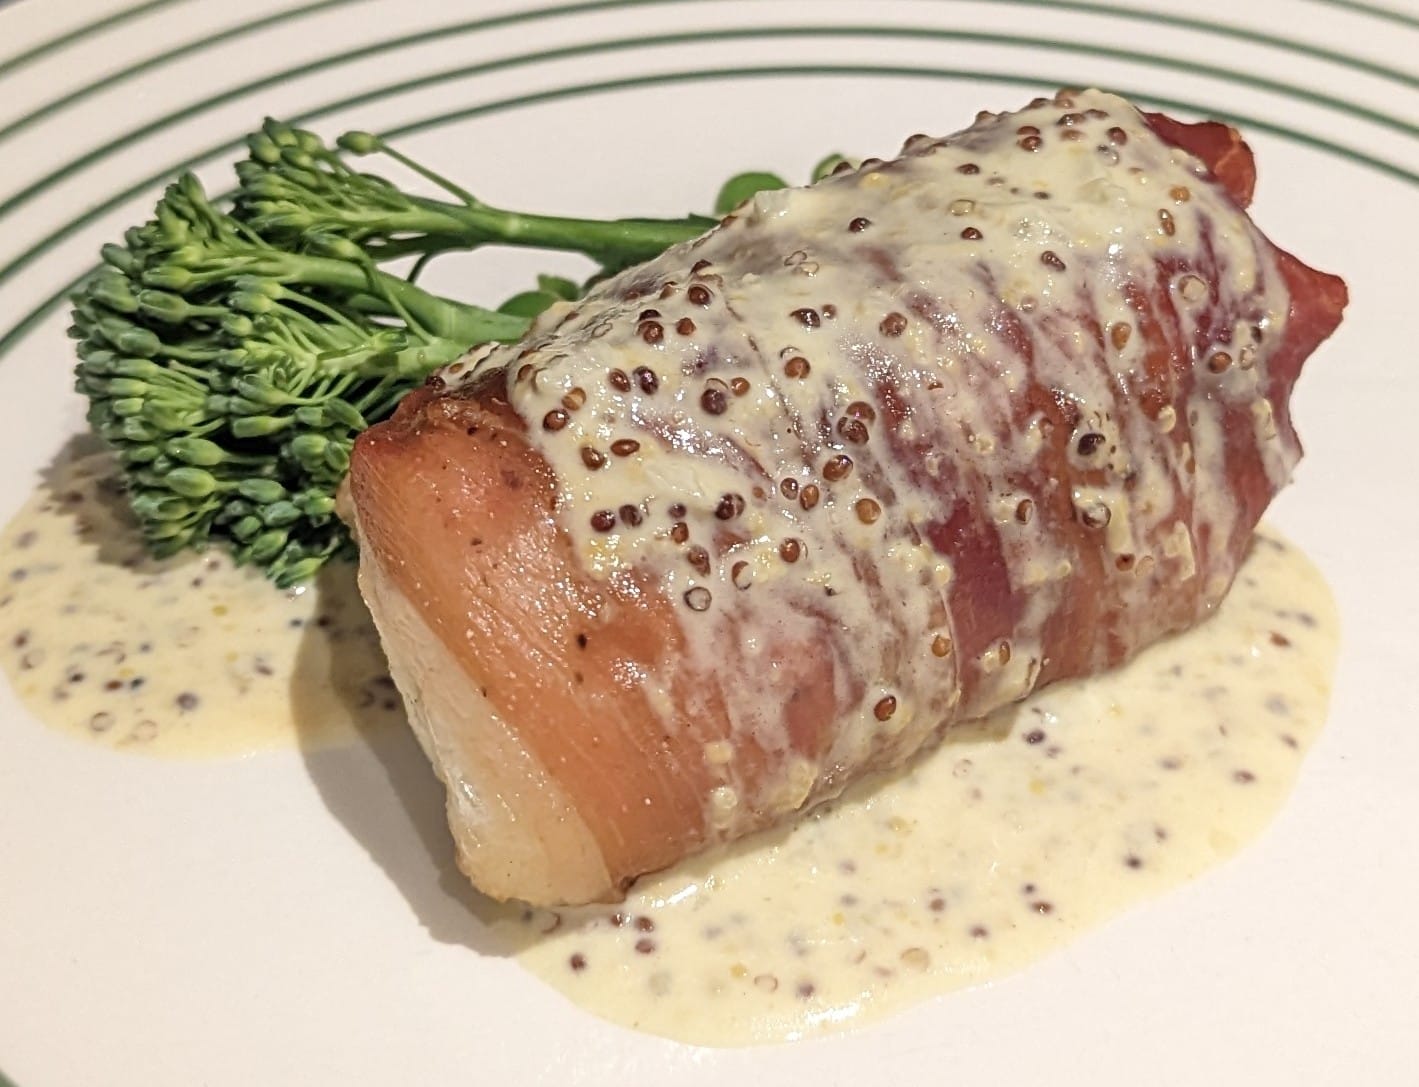 Monkfish Wrapped in Prosciutto Crudo with a White Wine and Mustard Sauce Featured Image - Full Image